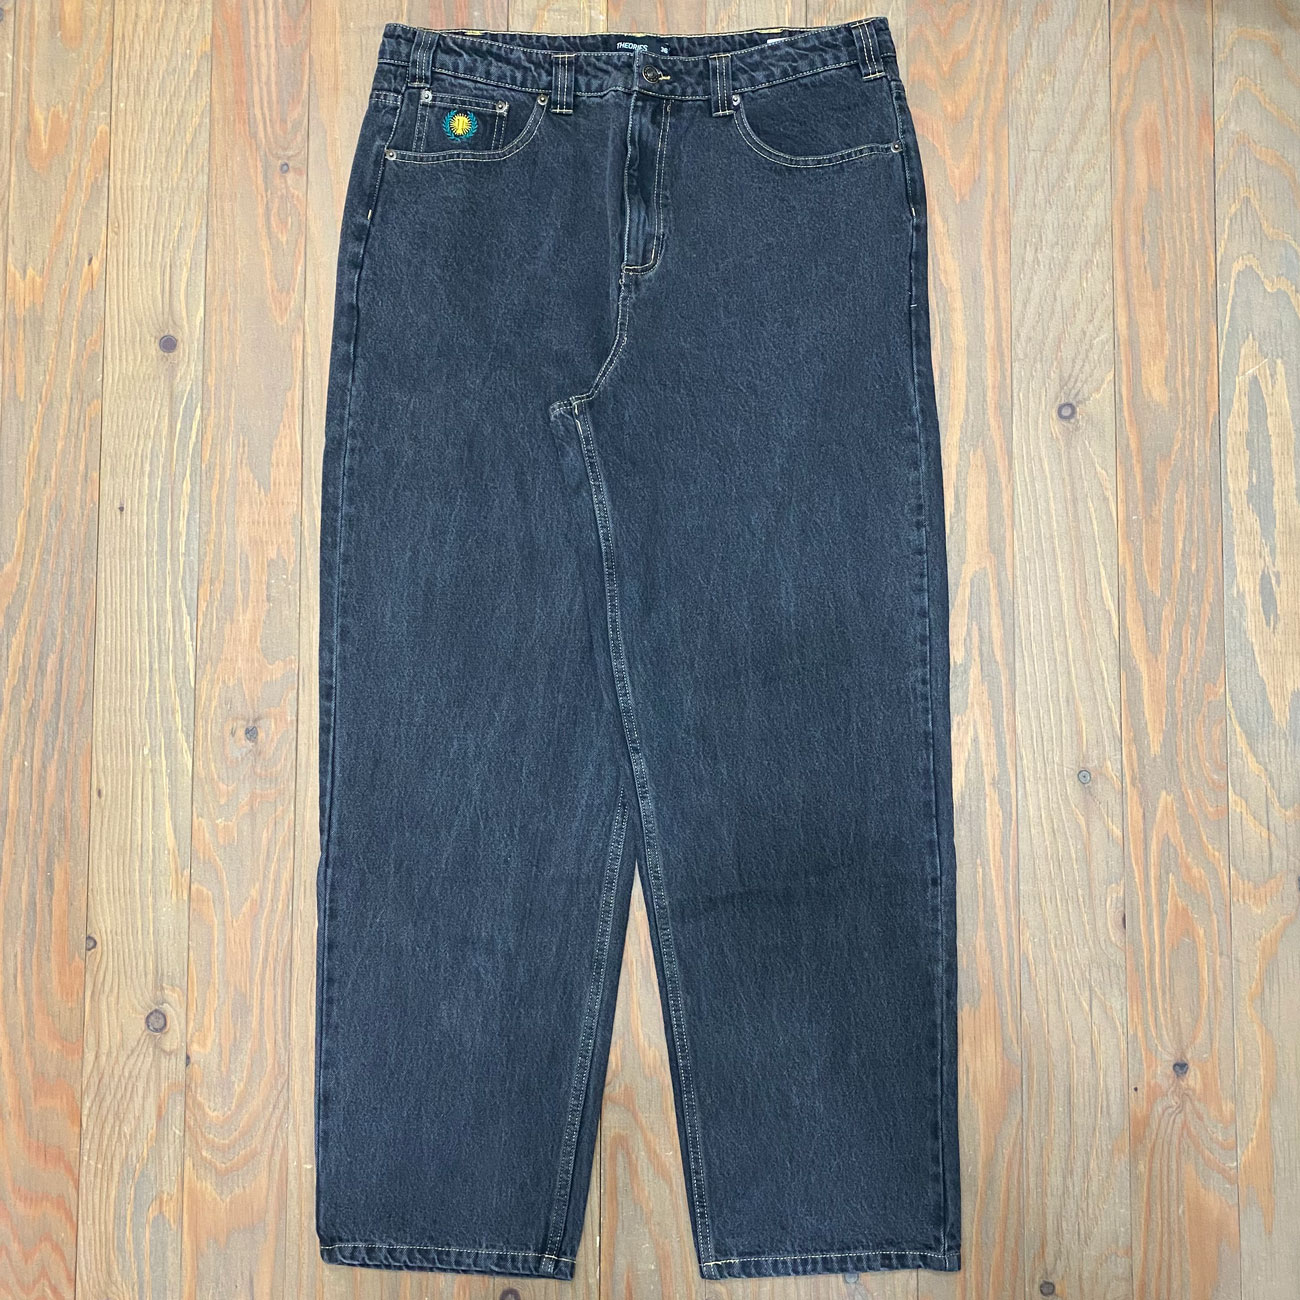 THEORIES PLAZA JEANS WASHED BLACK